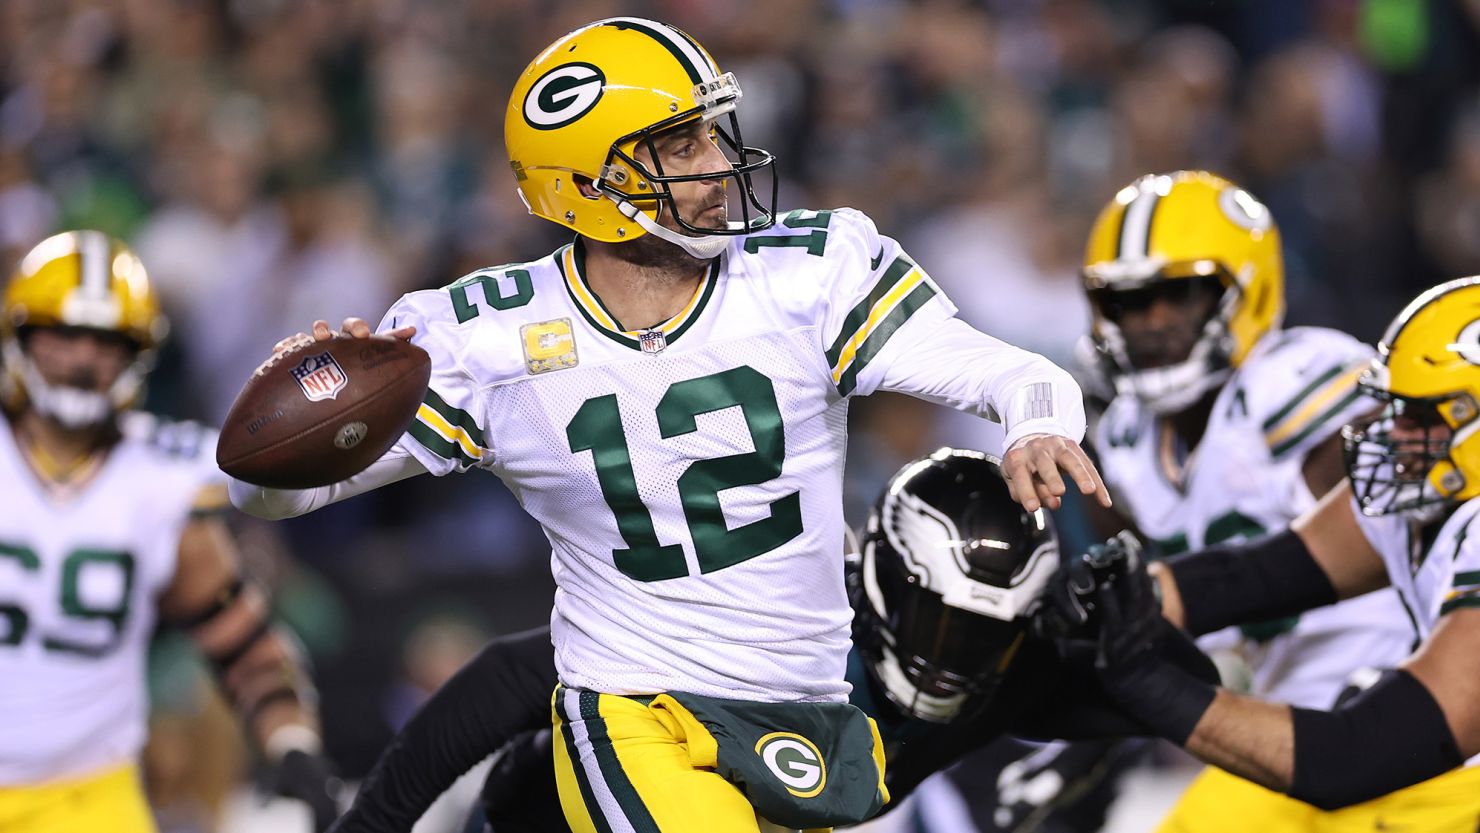 Aaron Rodgers has played for the Green Bay Packers for his entire 18-year professional career but an off-season move is likely.